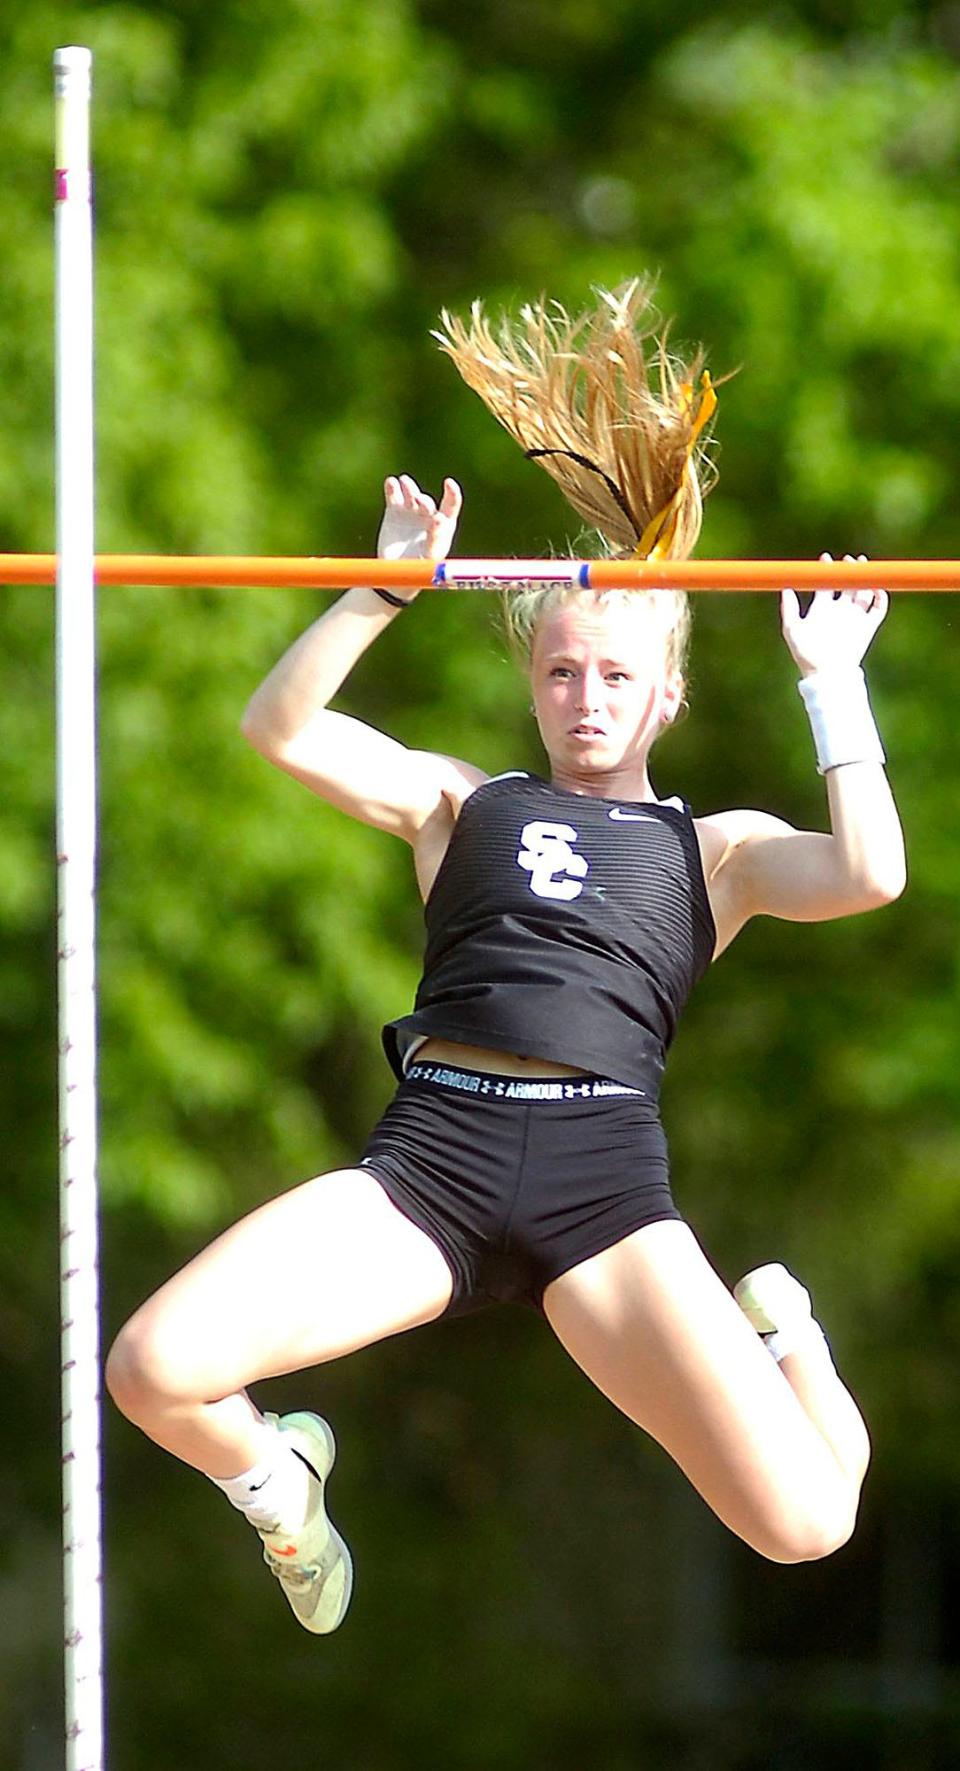 South Central's Onalee Keysor matched the conference record with this vault during the Firelands Conference track championships  at New London Friday May 13,2022. STEVE STOKES/FOR TIMES-GAZETTE.COM